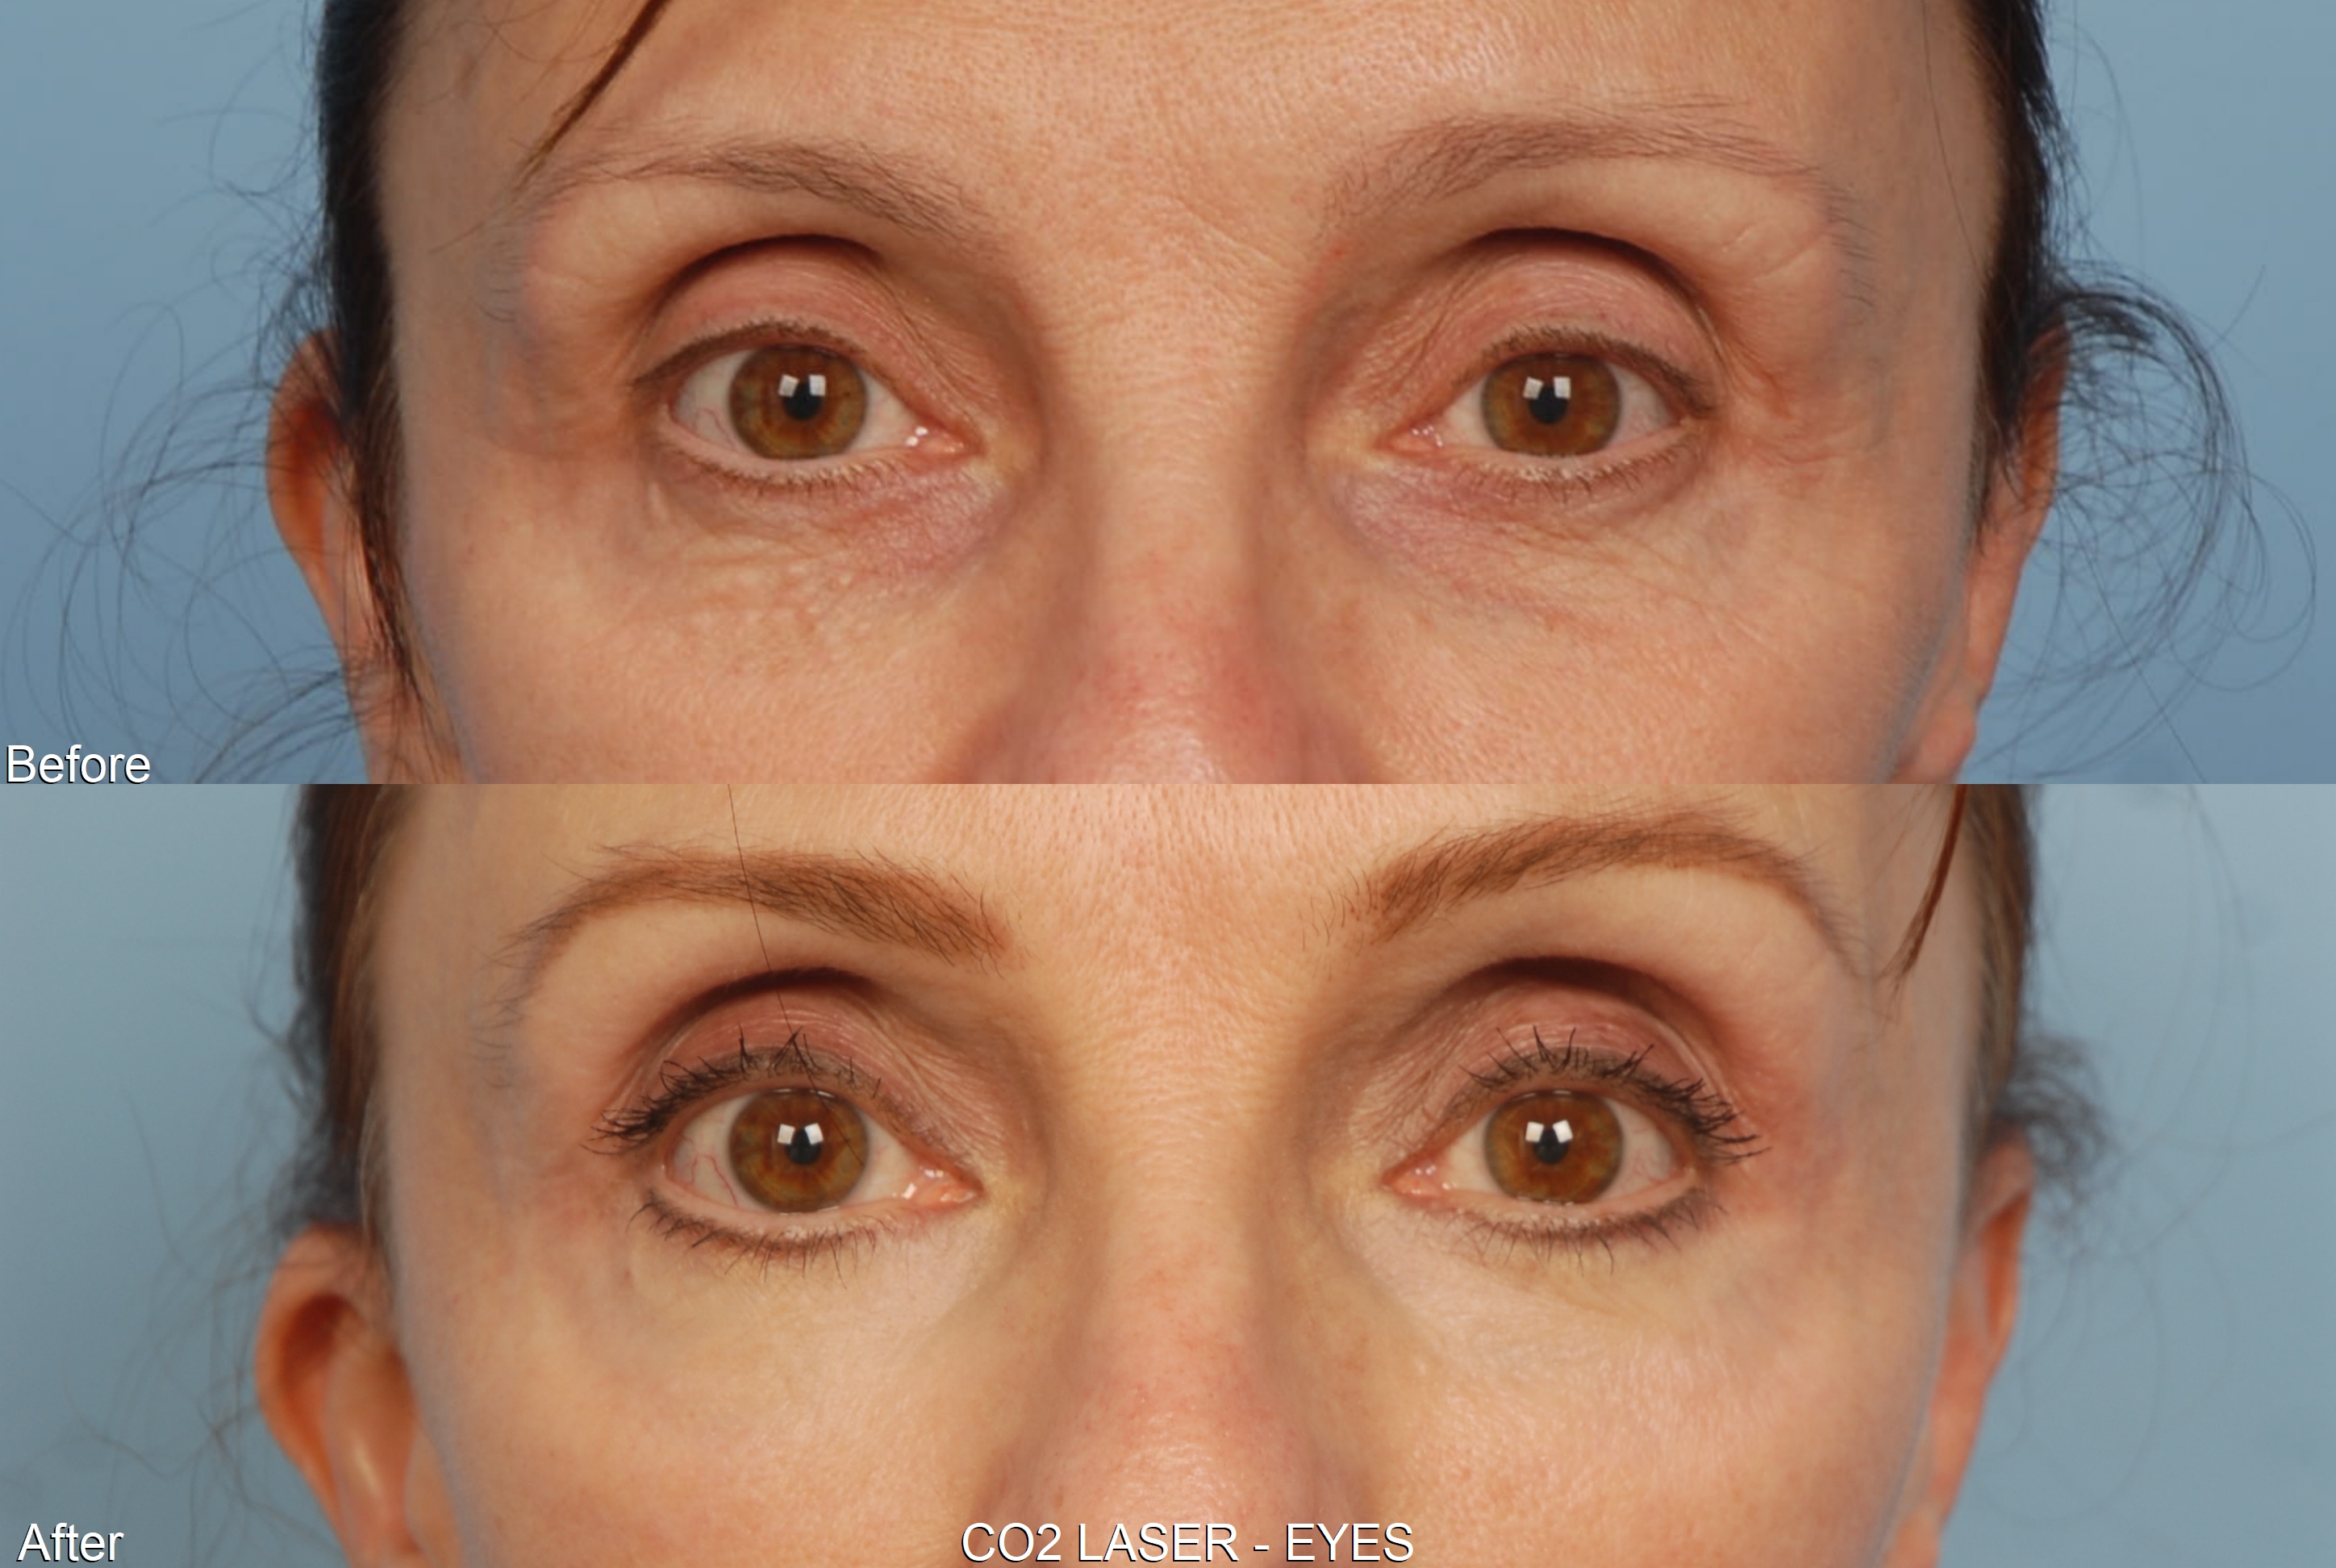 Laser Resurfacing Before and After Pictures of Actual Patients